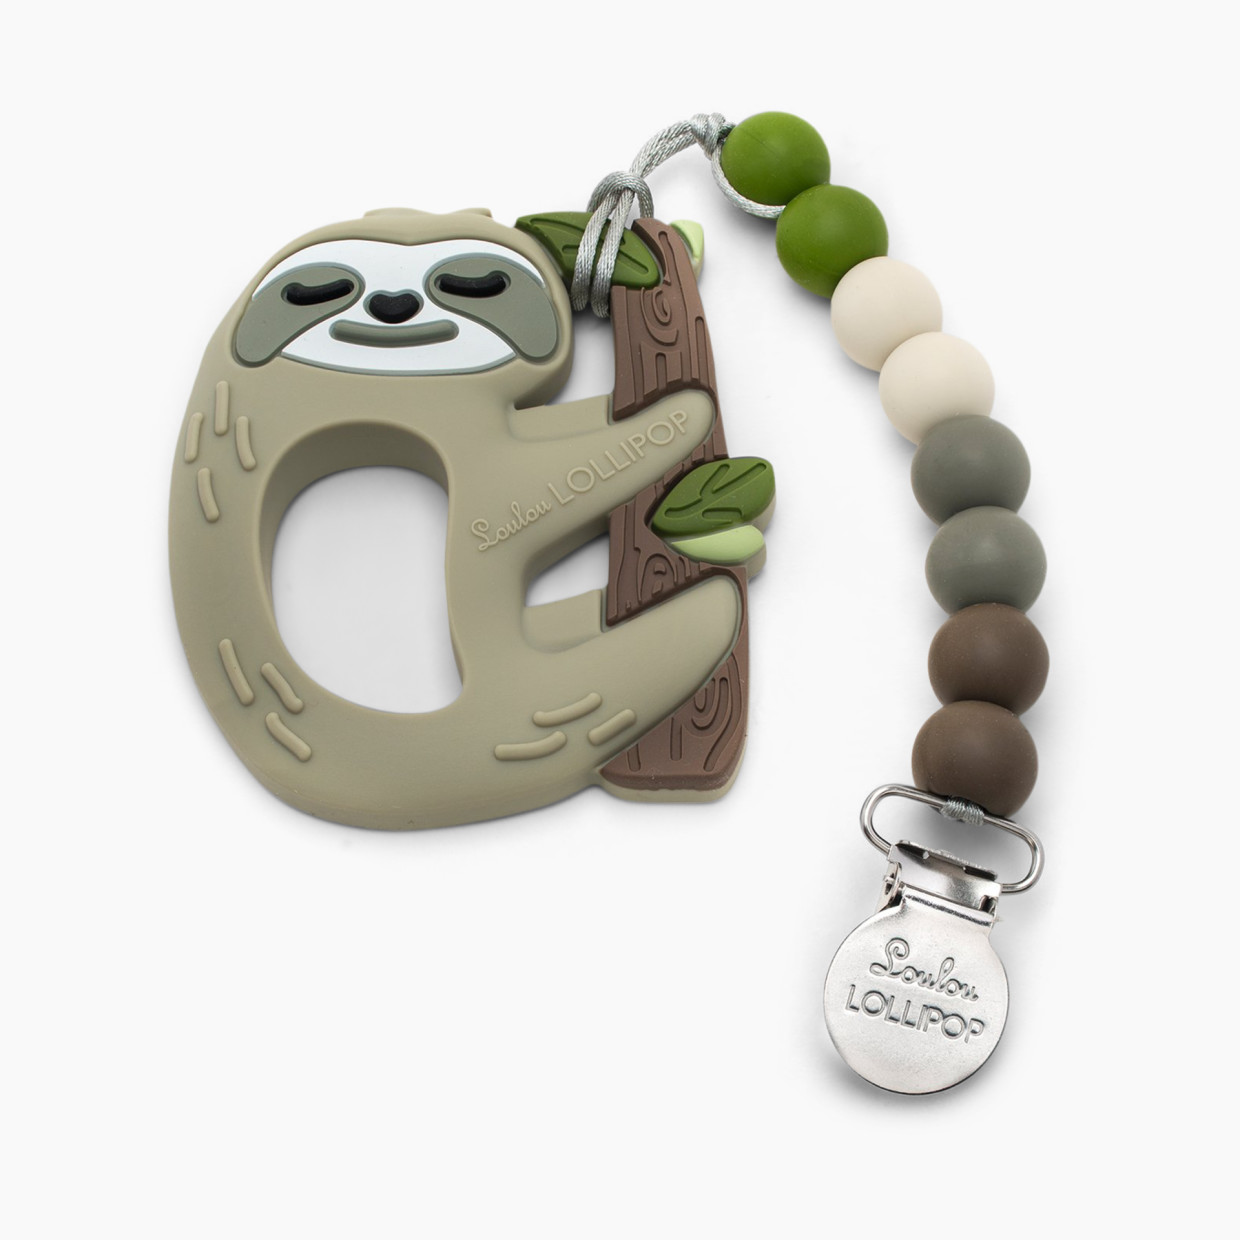 Loulou Lollipop Silicone Teether with Metal Clip - Sloth.